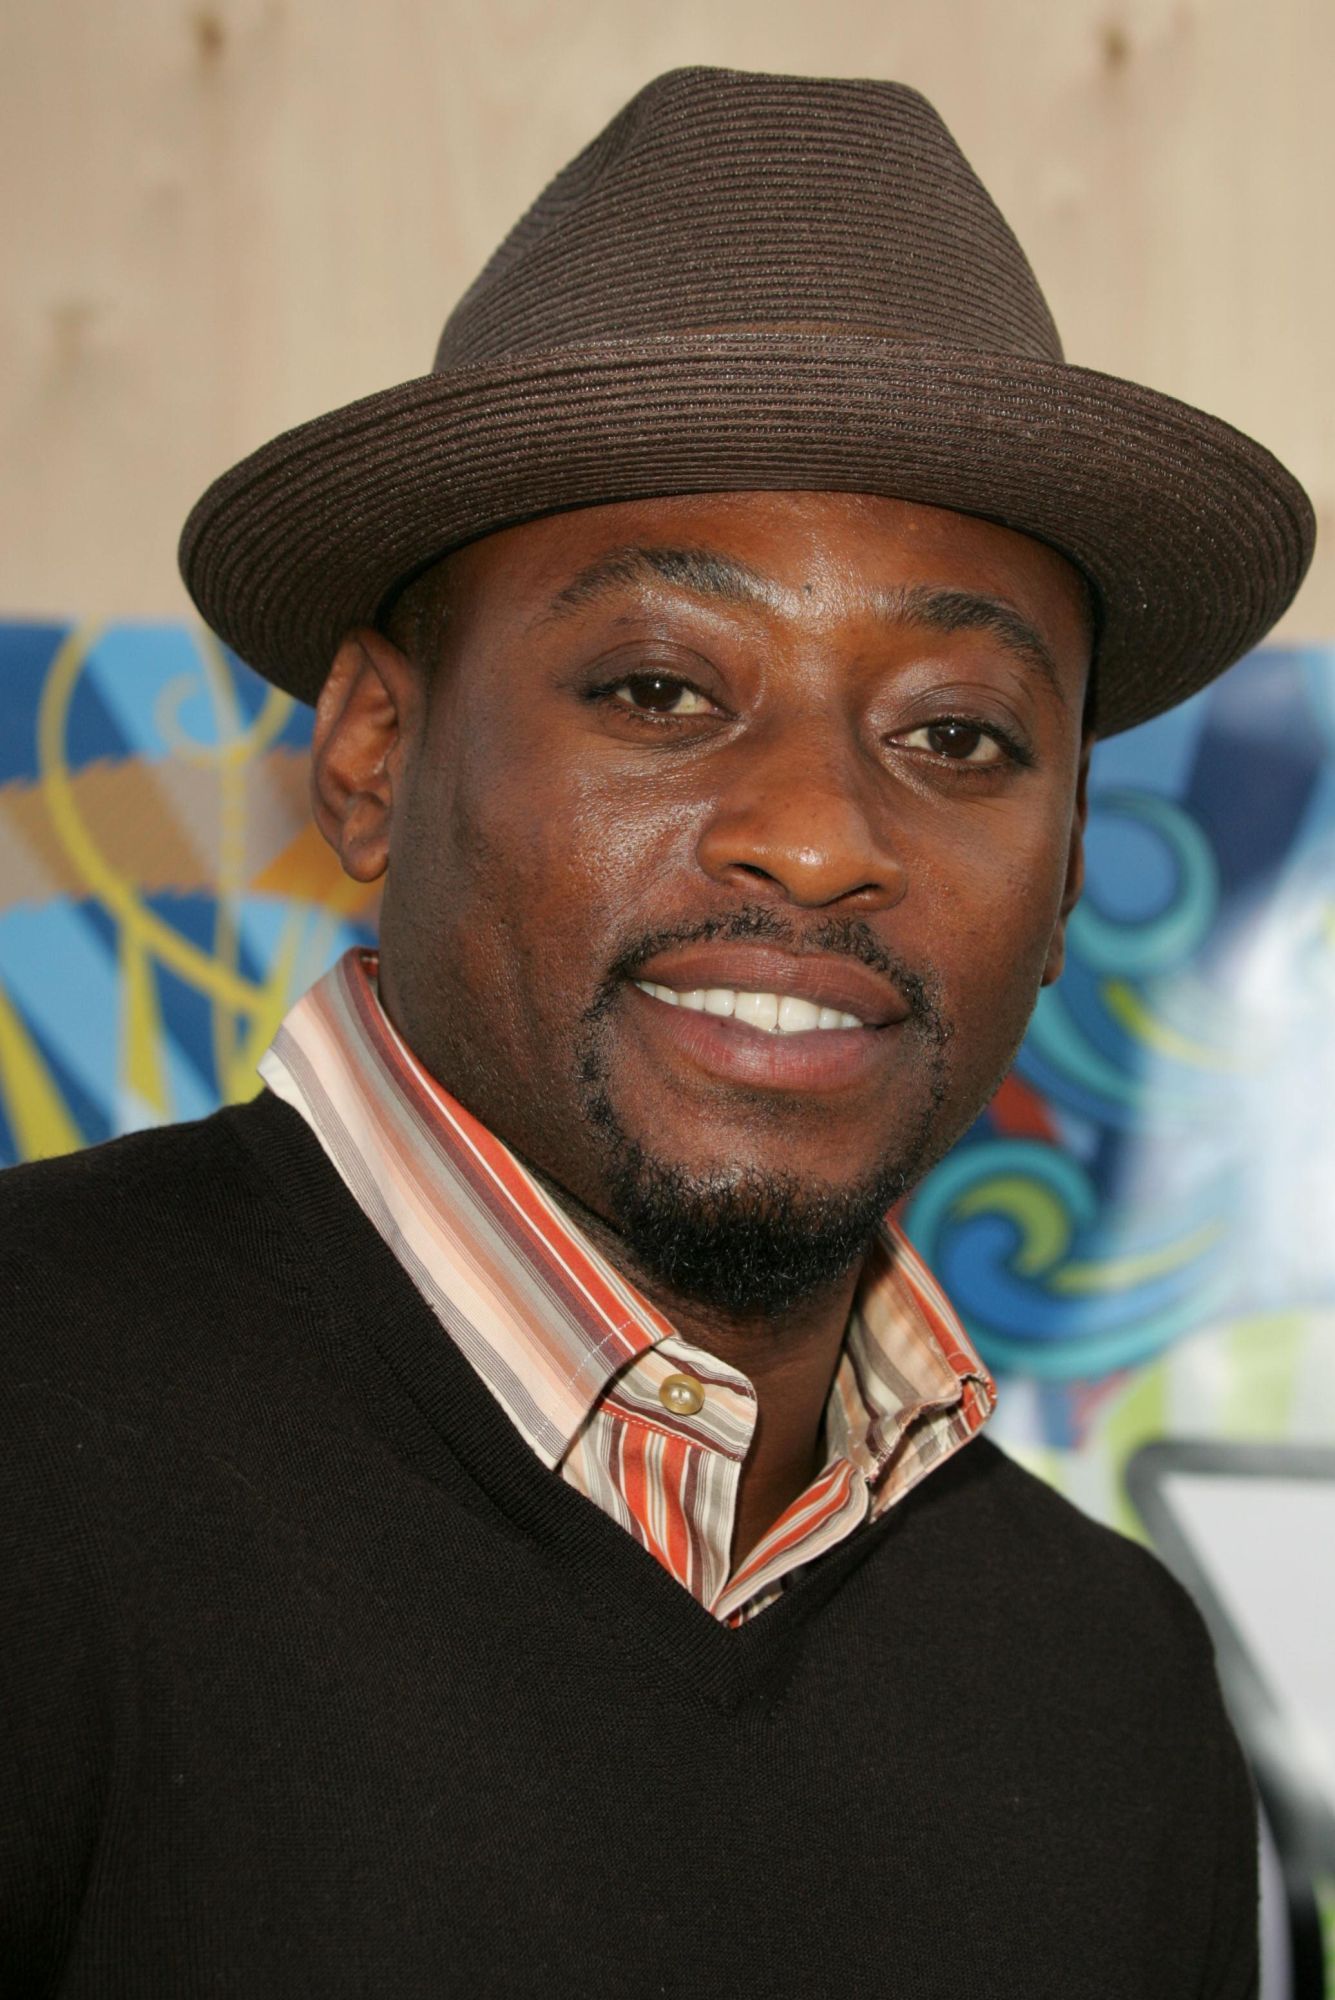 Omar Epps Image HD Wallpaper And Background Photos